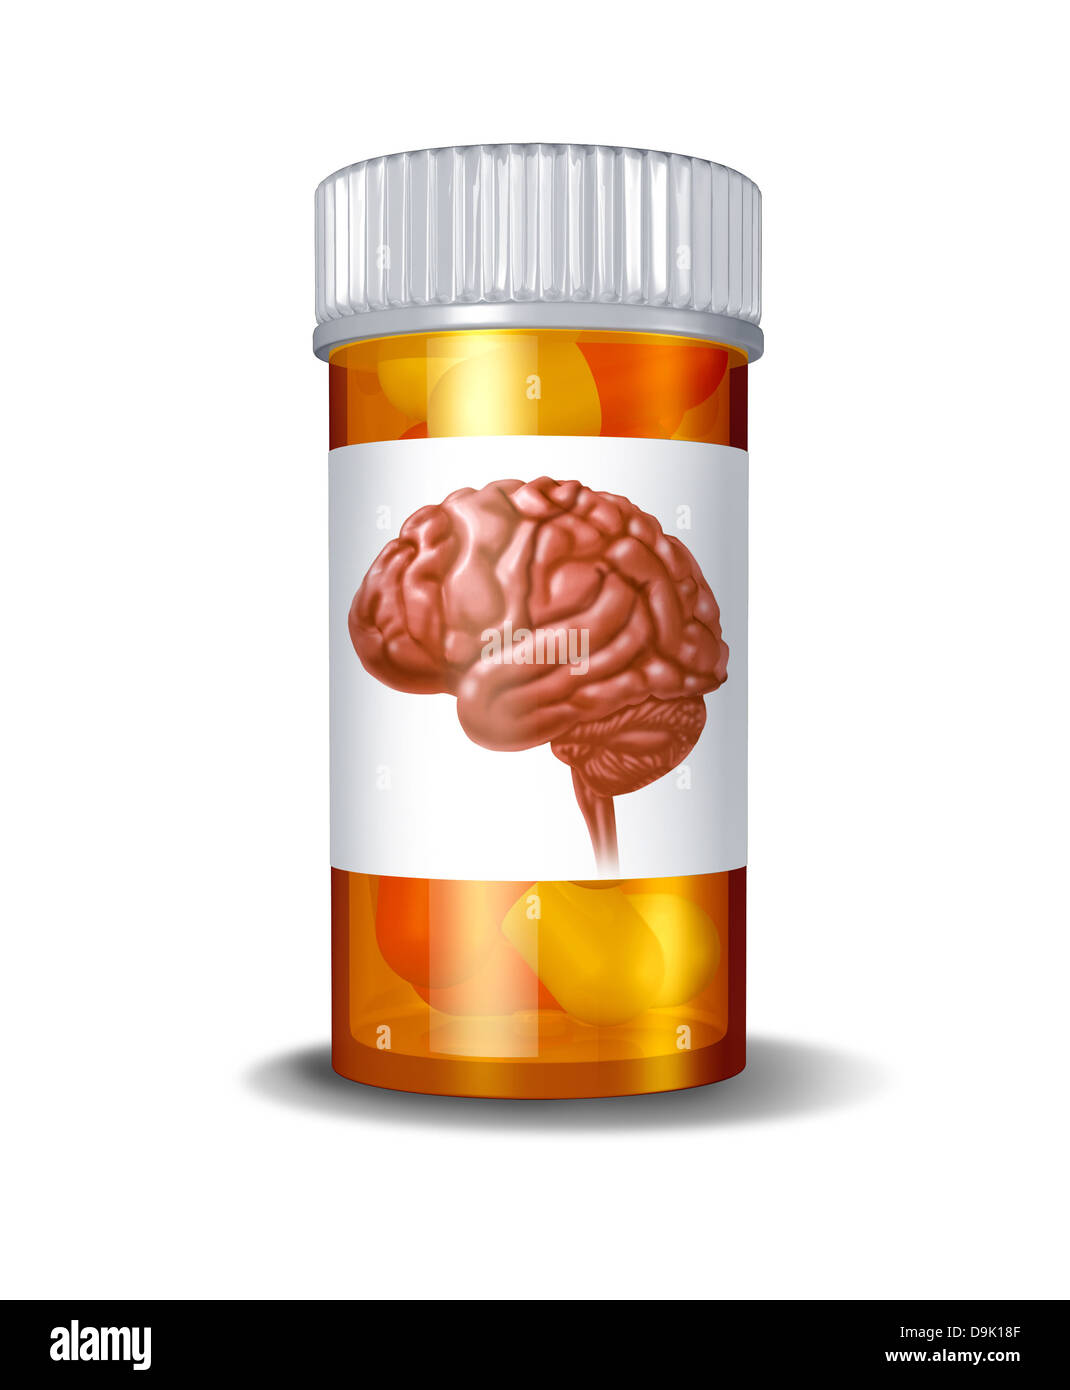 Psychiatric drugs and brain medicine medical concept with a prescription medication bottle with pills inside and a label with an image of a human brain for health care and pharmaceutical therapy. Stock Photo